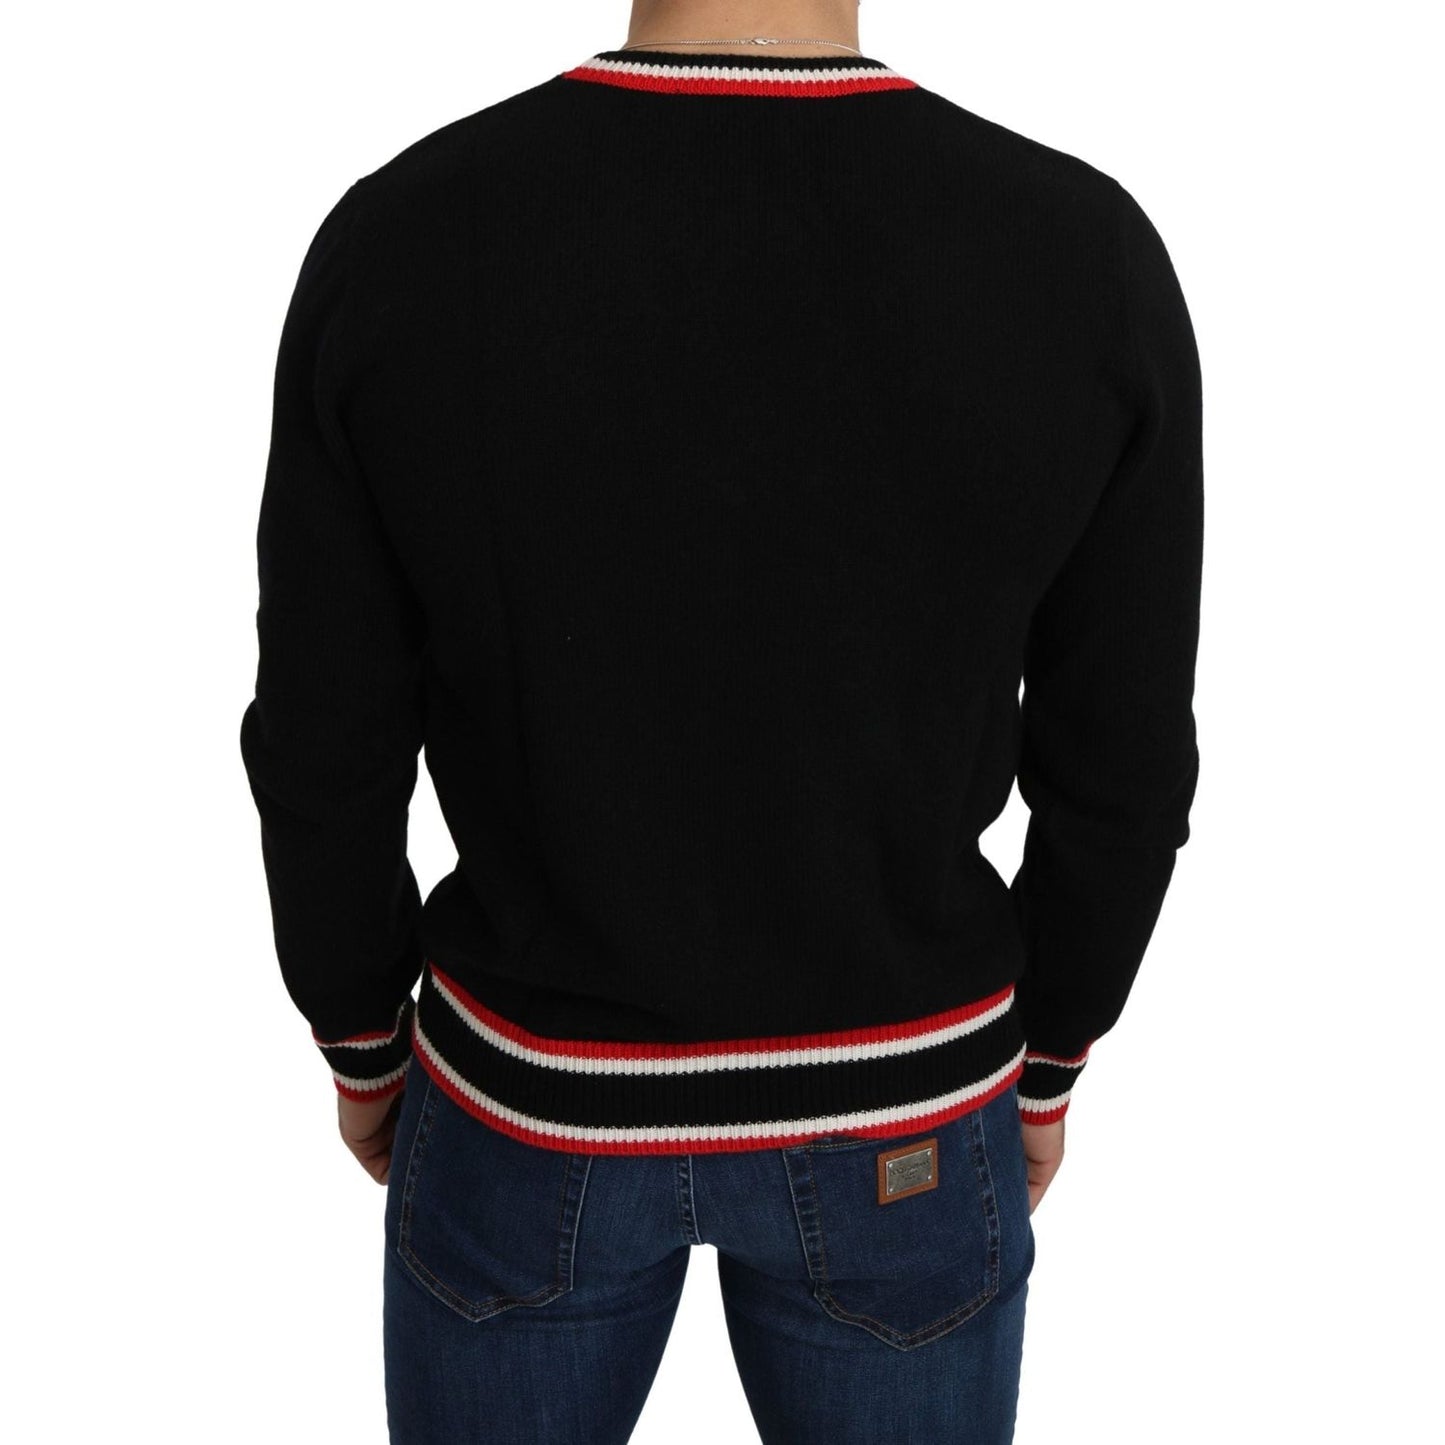 Dolce & Gabbana Elegant Black Cashmere Crew Neck Sweater black-cashmere-pig-of-the-year-pullover-sweater